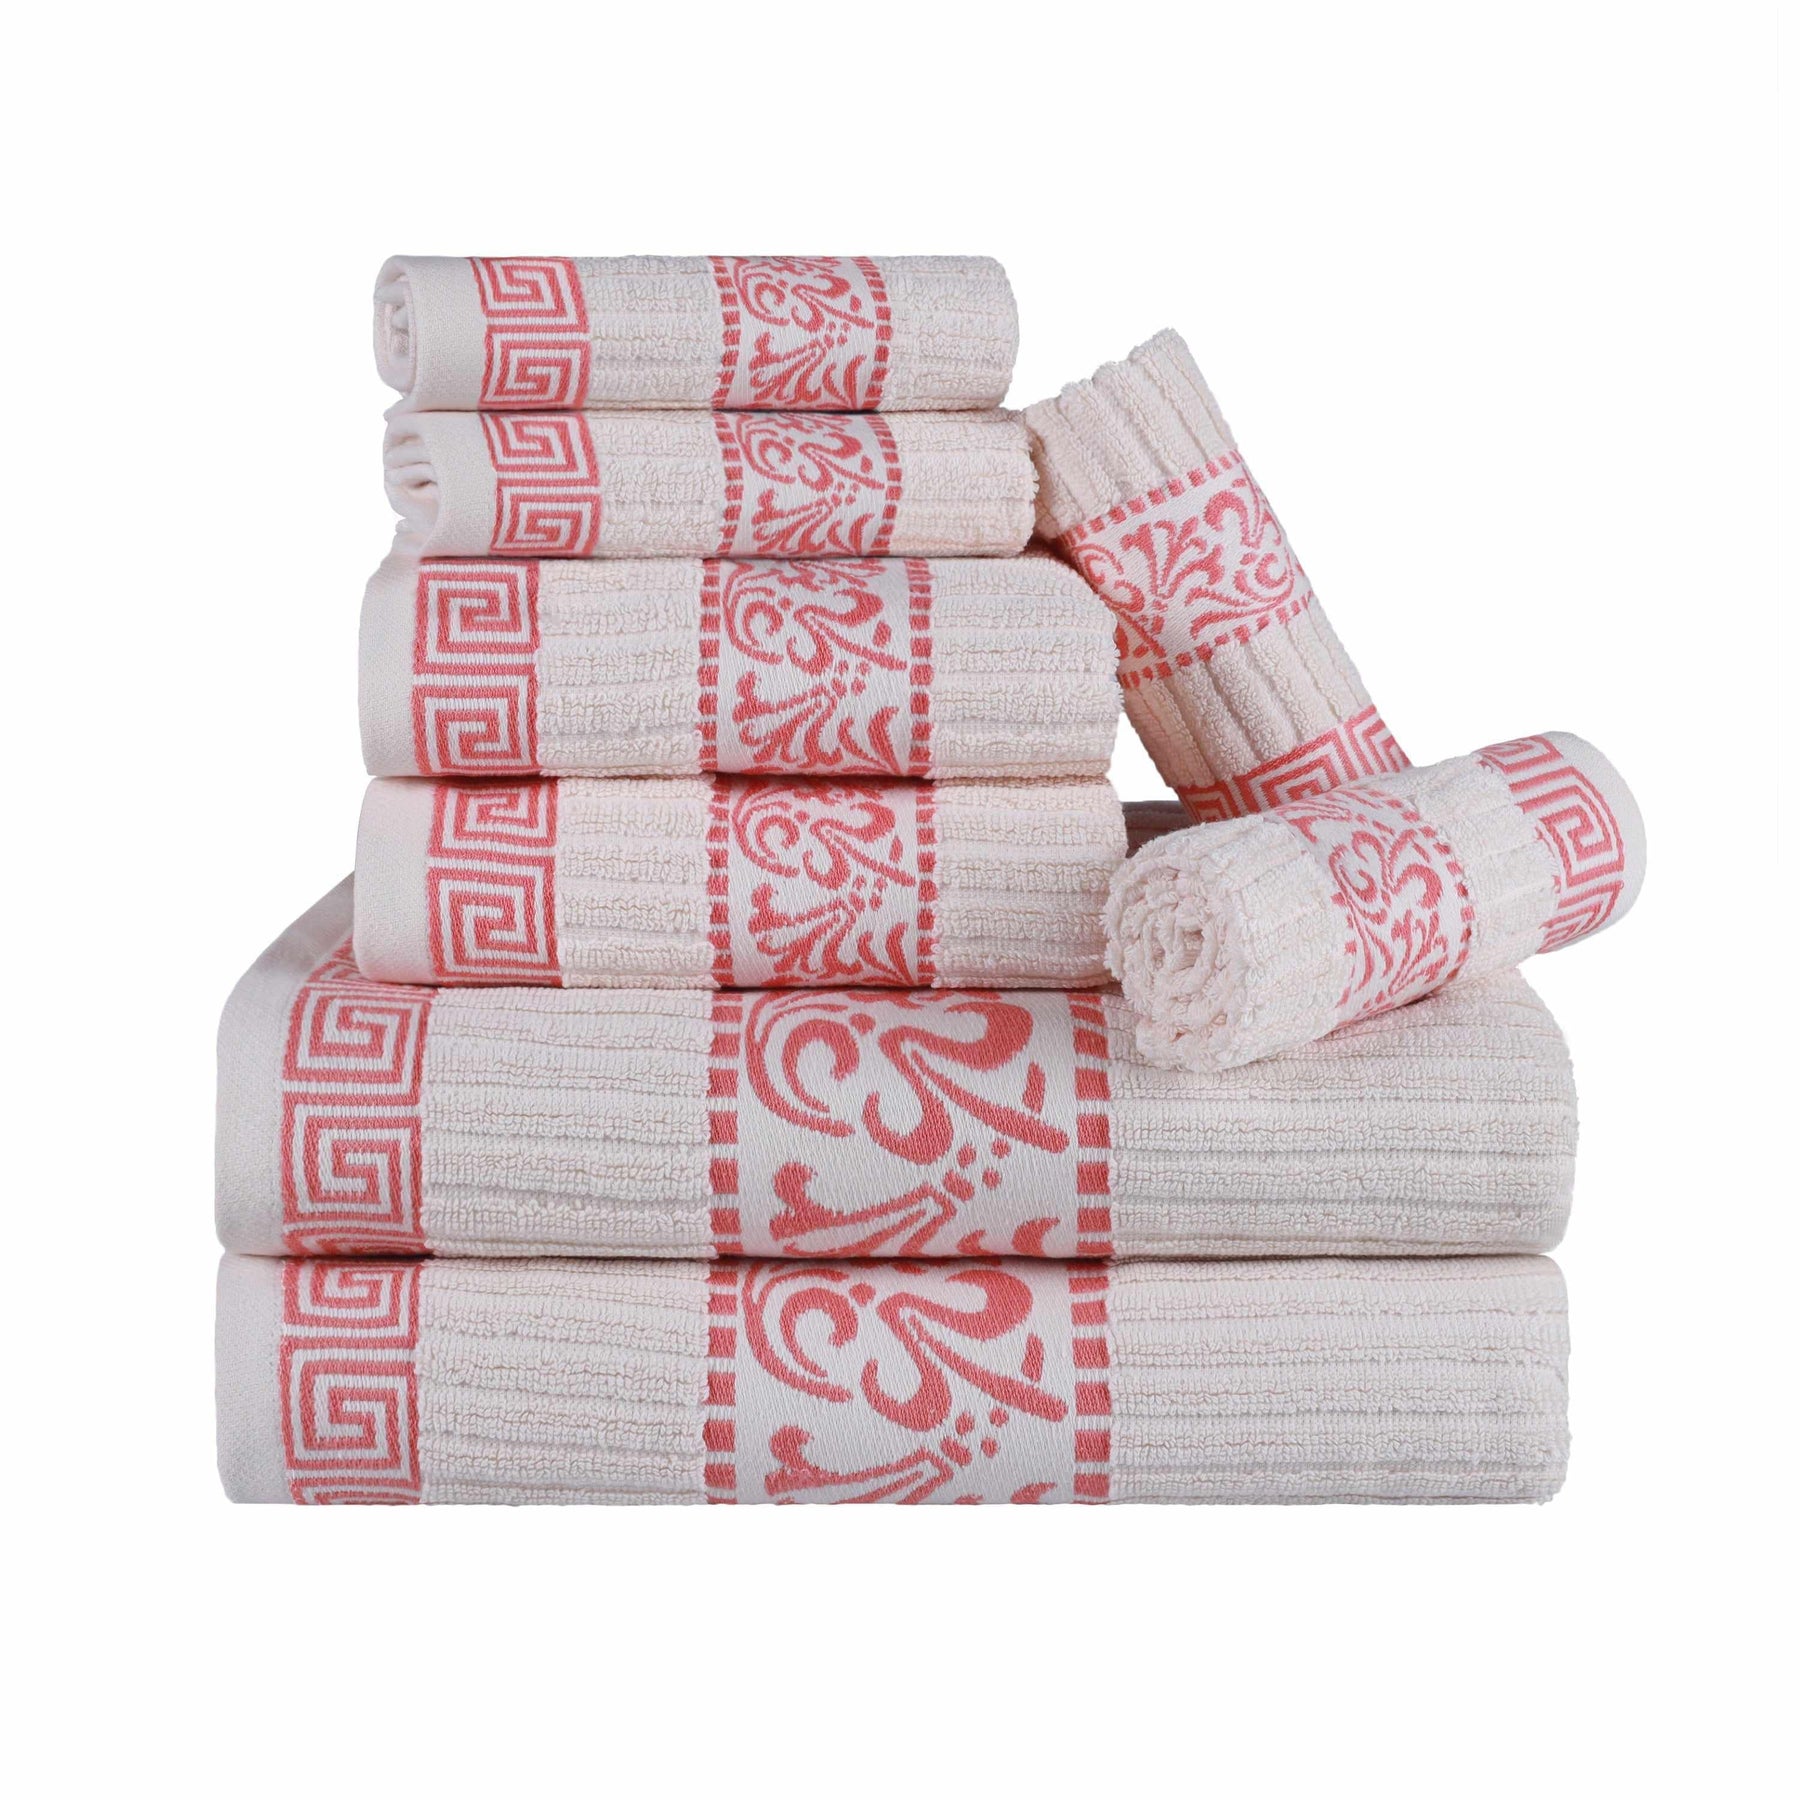 Superior Athens Cotton 8-Piece Towel Set with Greek Scroll and Floral Pattern - Ivory-Coral